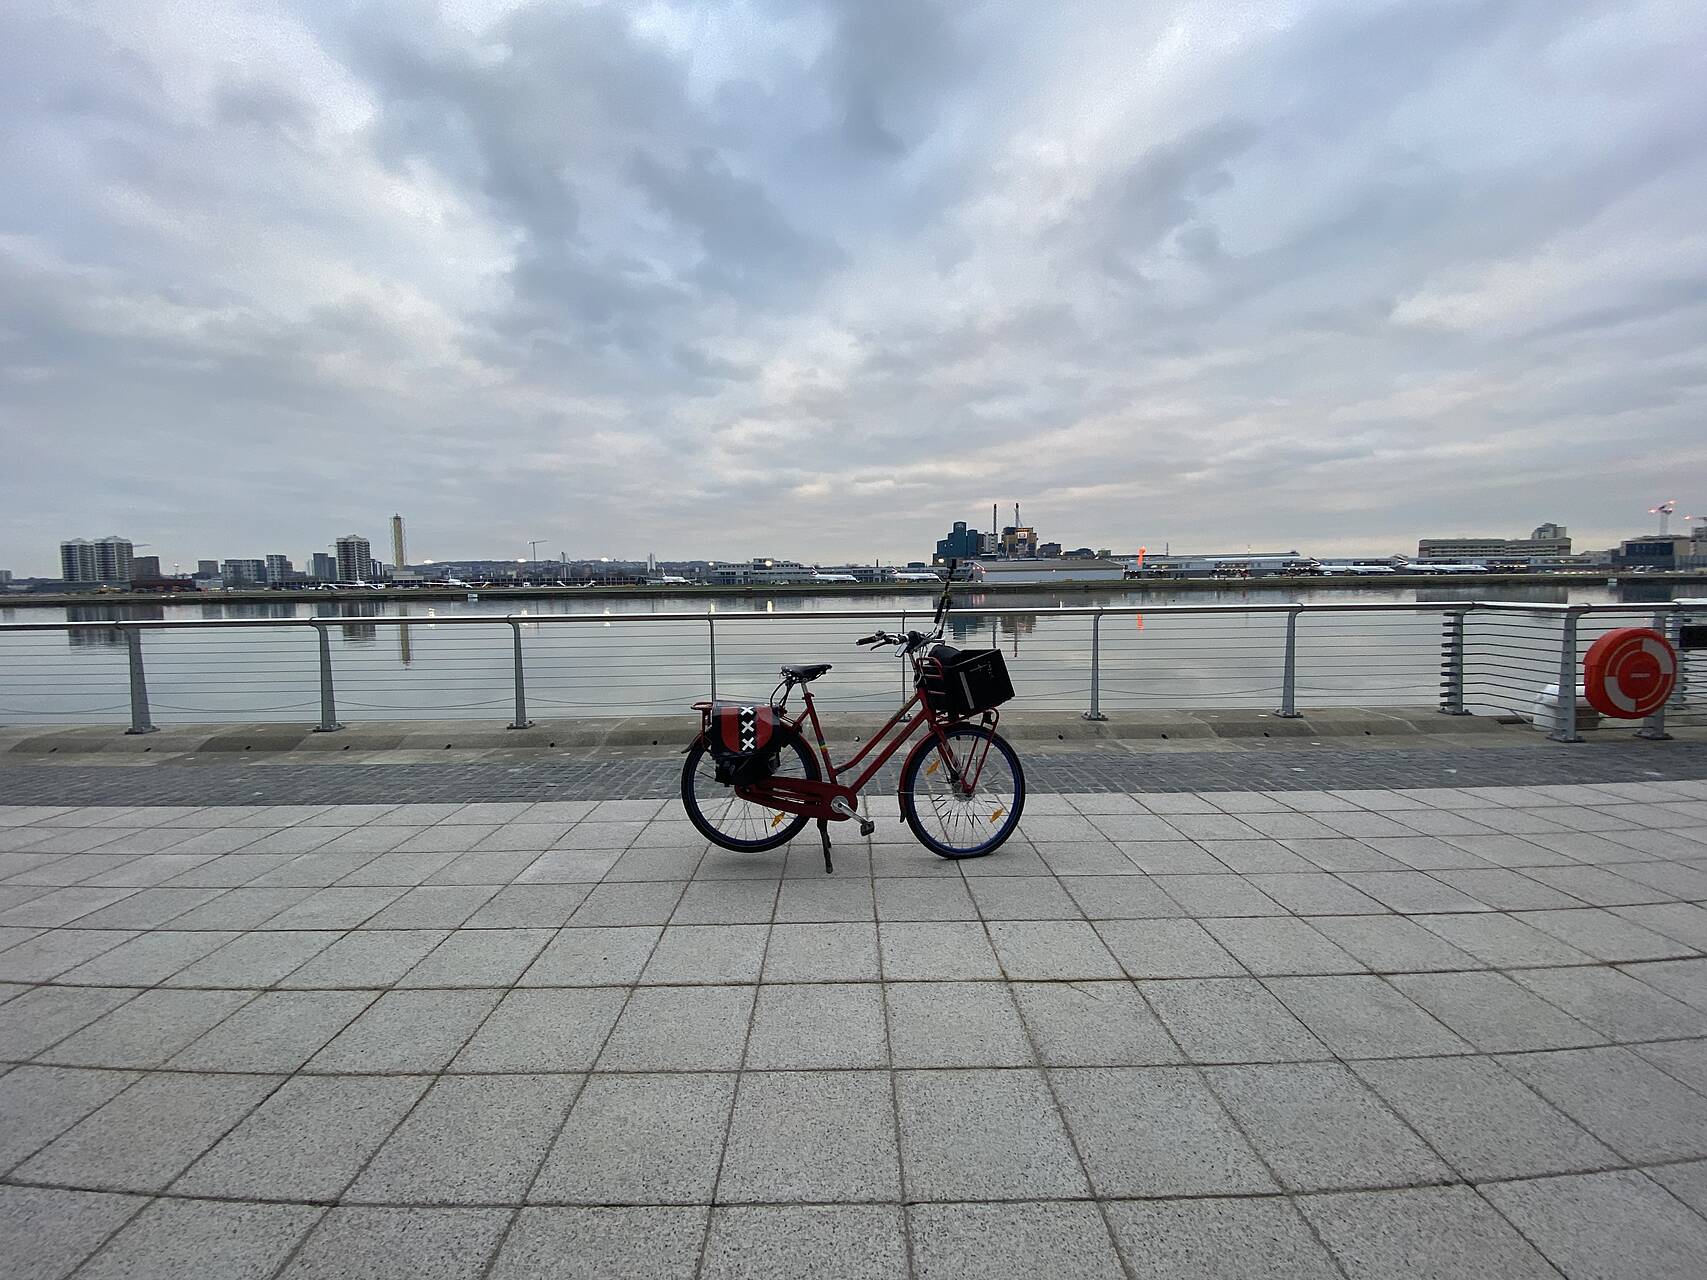 Red Dutch bicycle on its kickstand on a paved area in front of a dock with London City Airport in the background across the dock.jpeg